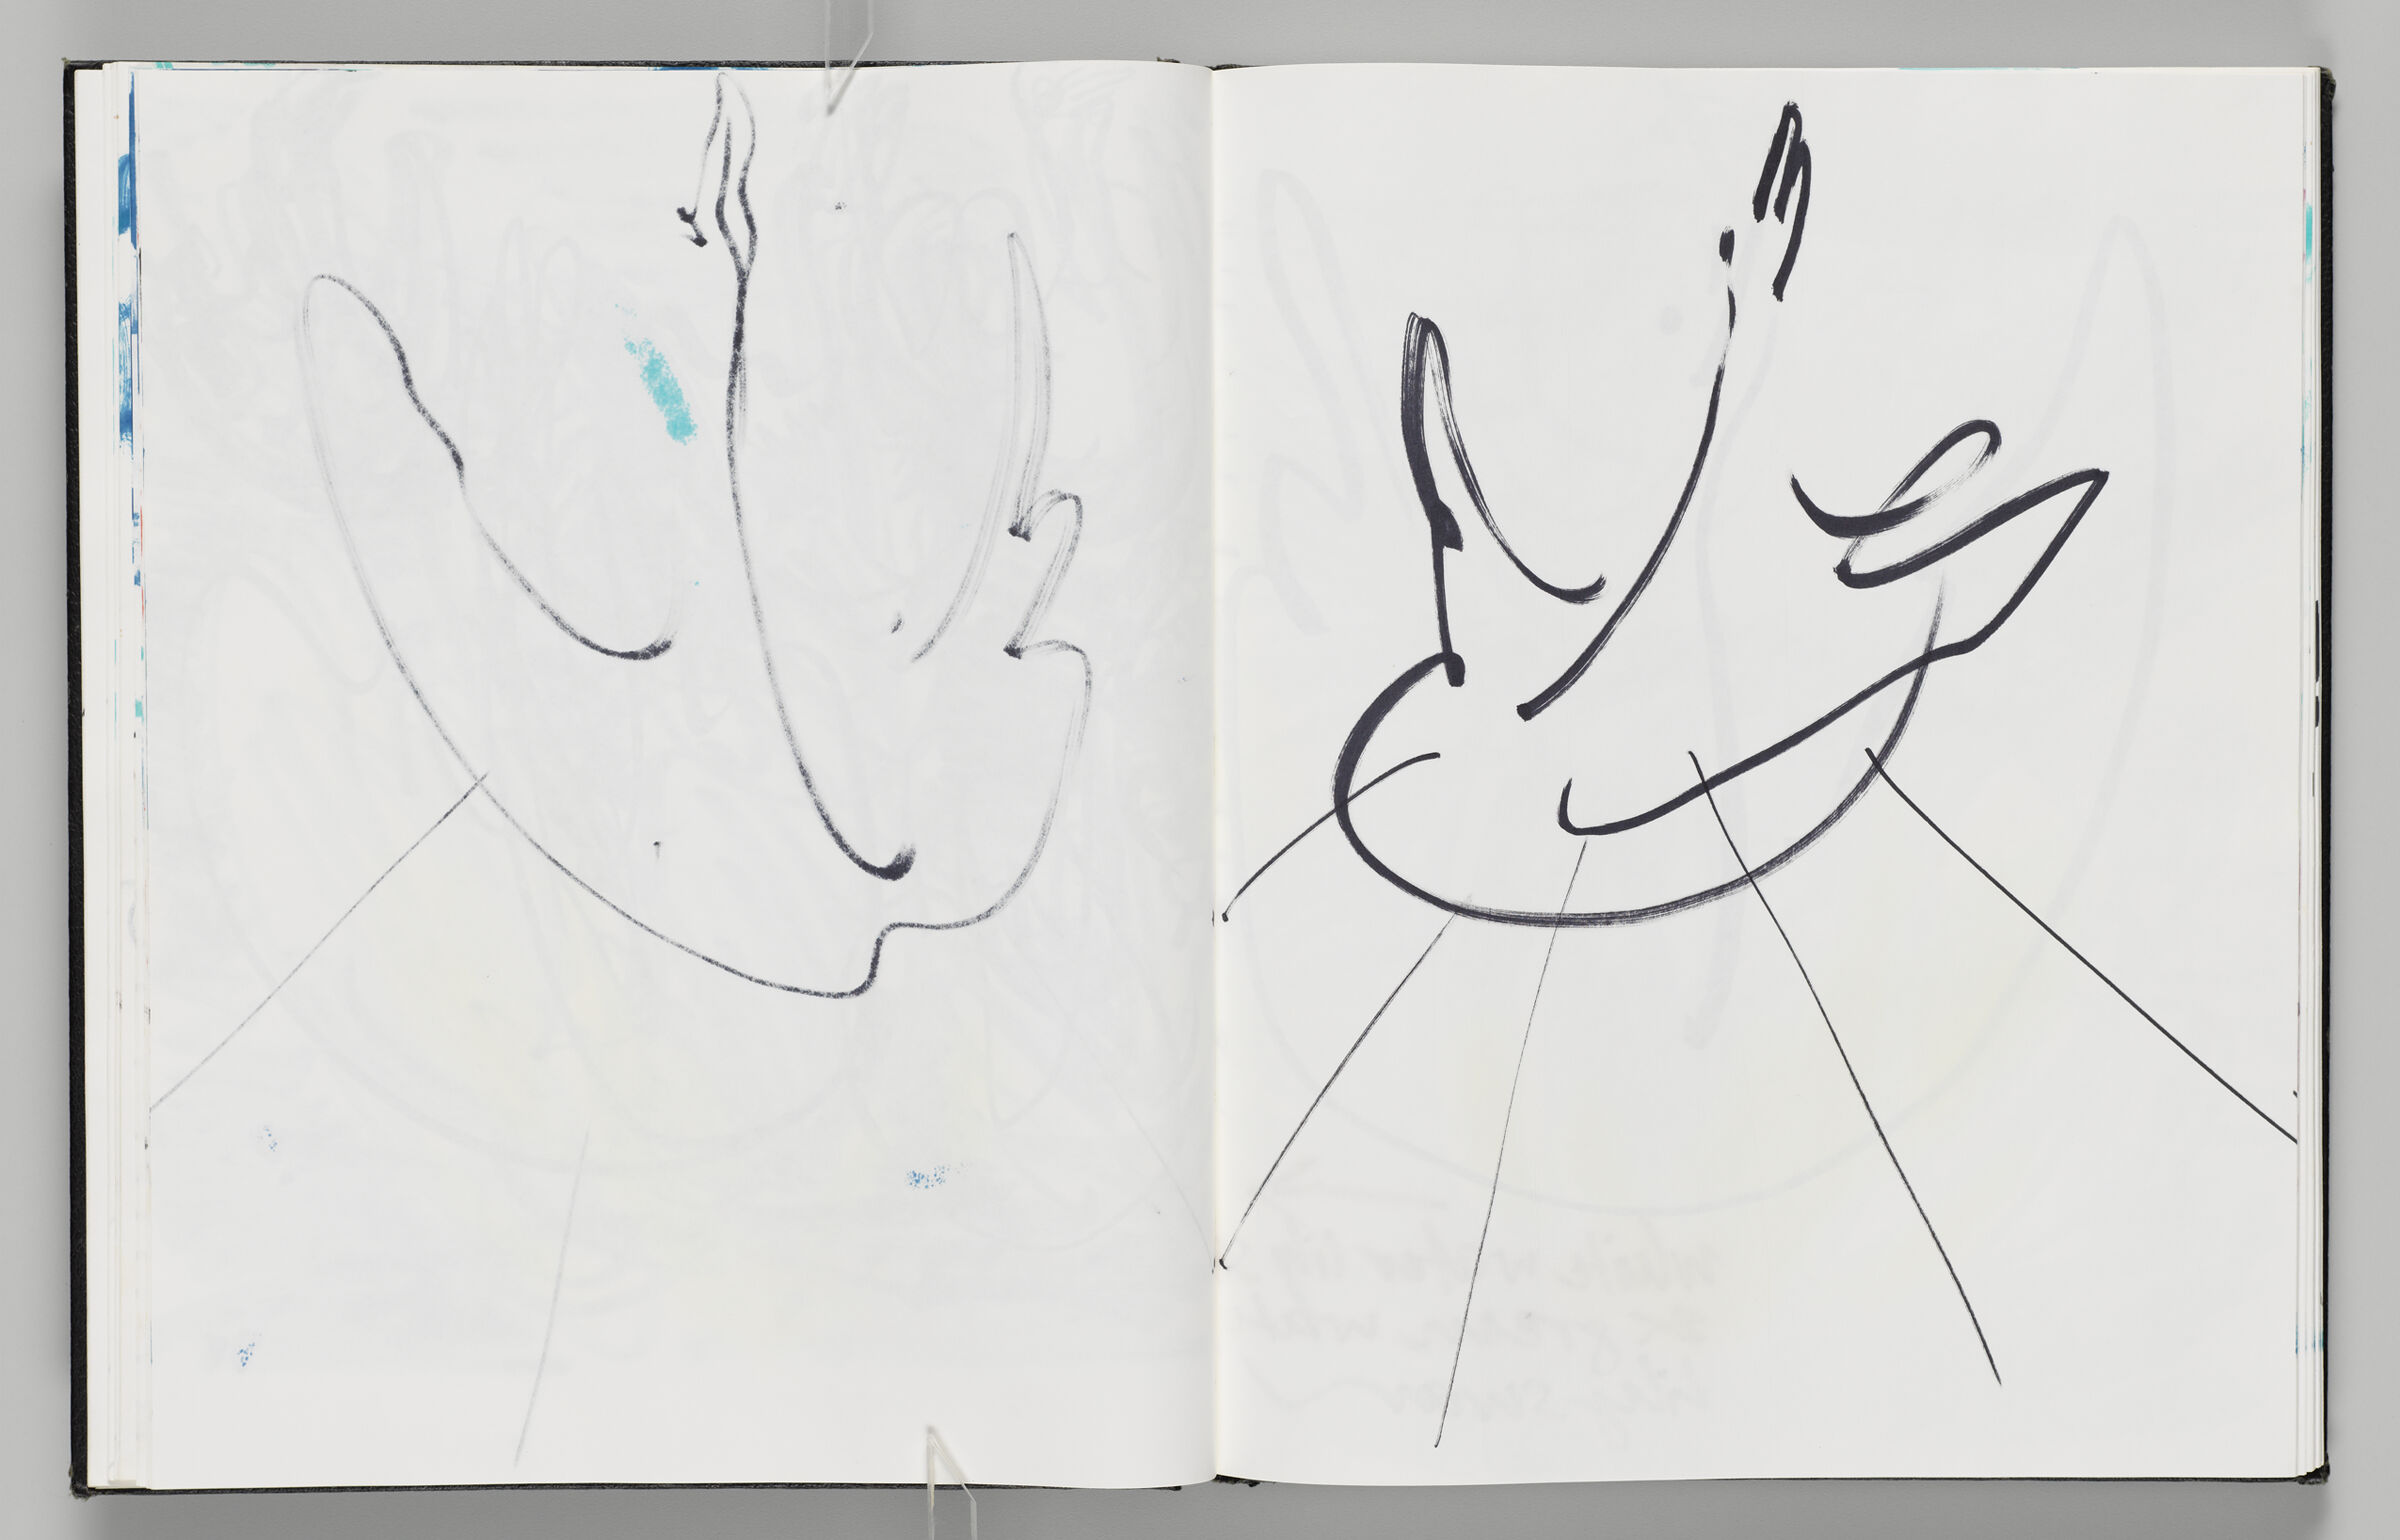 Untitled (Bleed-Through Of Previous Page, Left Page); Untitled (Swan Inflatable, Right Page)